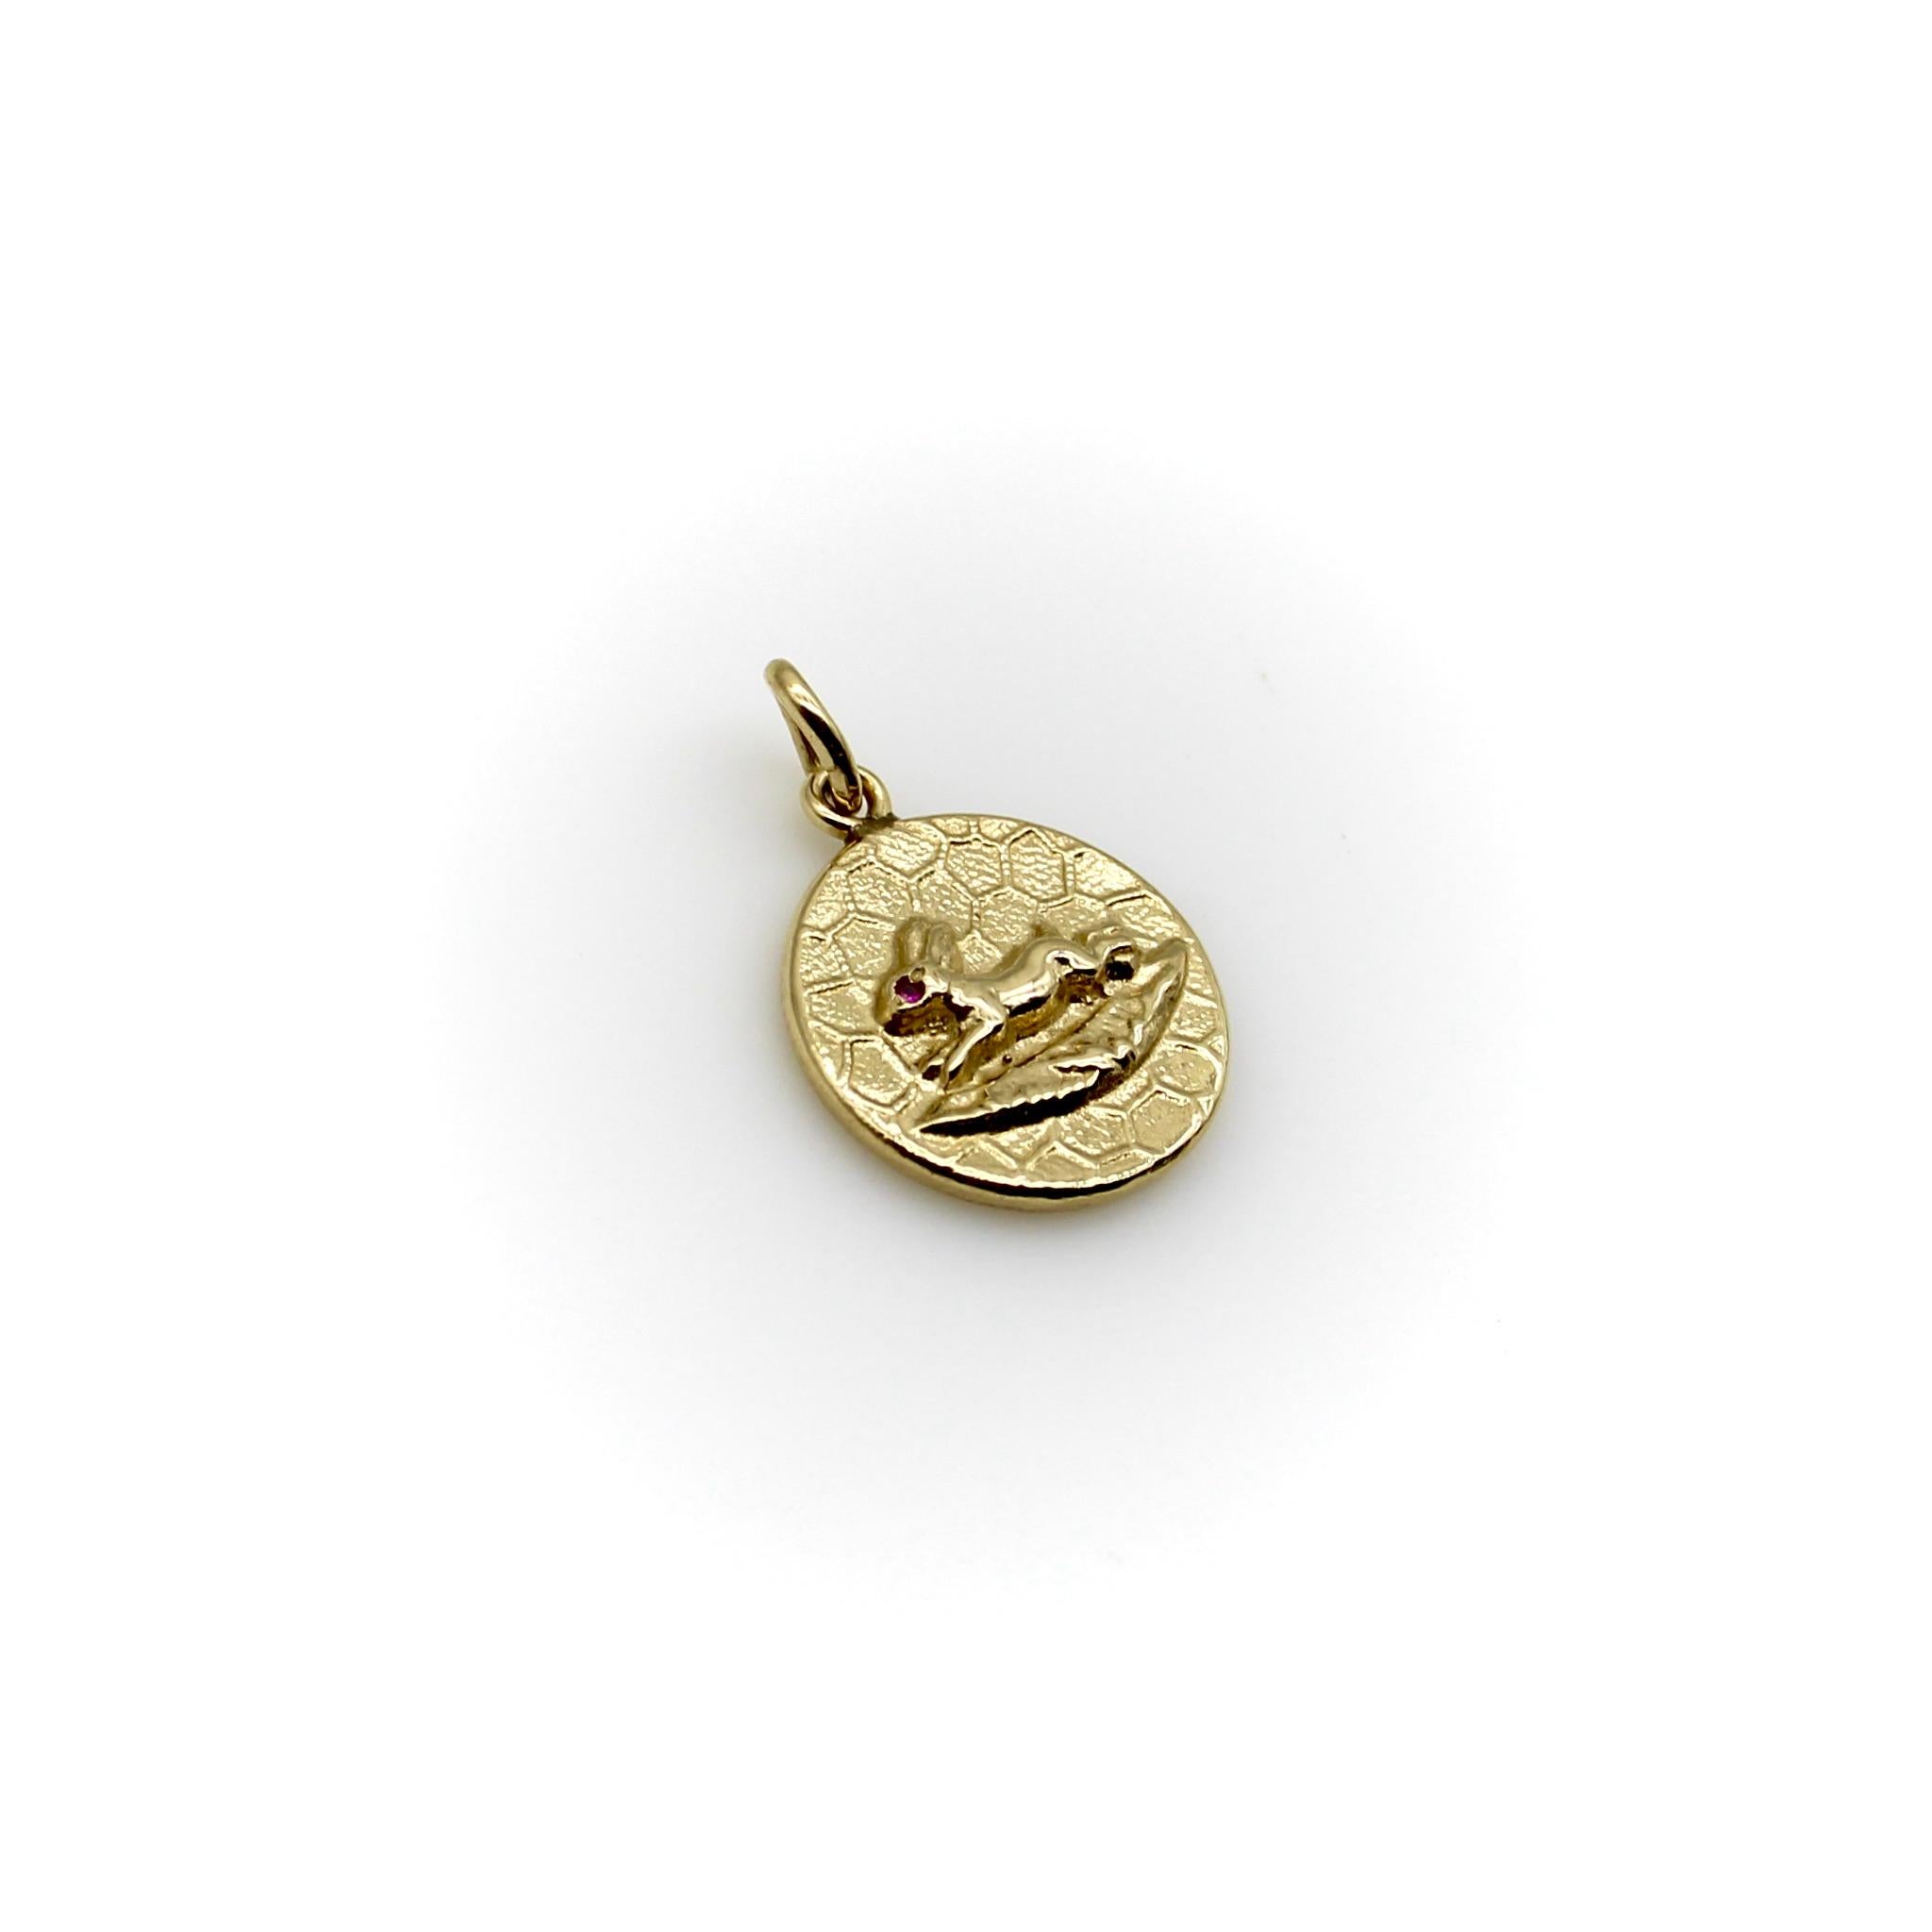 This is a precious 14k gold medallion charm from Kirsten’s Corner signature “Cute as a Button” collection. It is handcrafted from a Victorian era button and features a profile view of a jumping rabbit against a honeycomb background. The rabbit has a